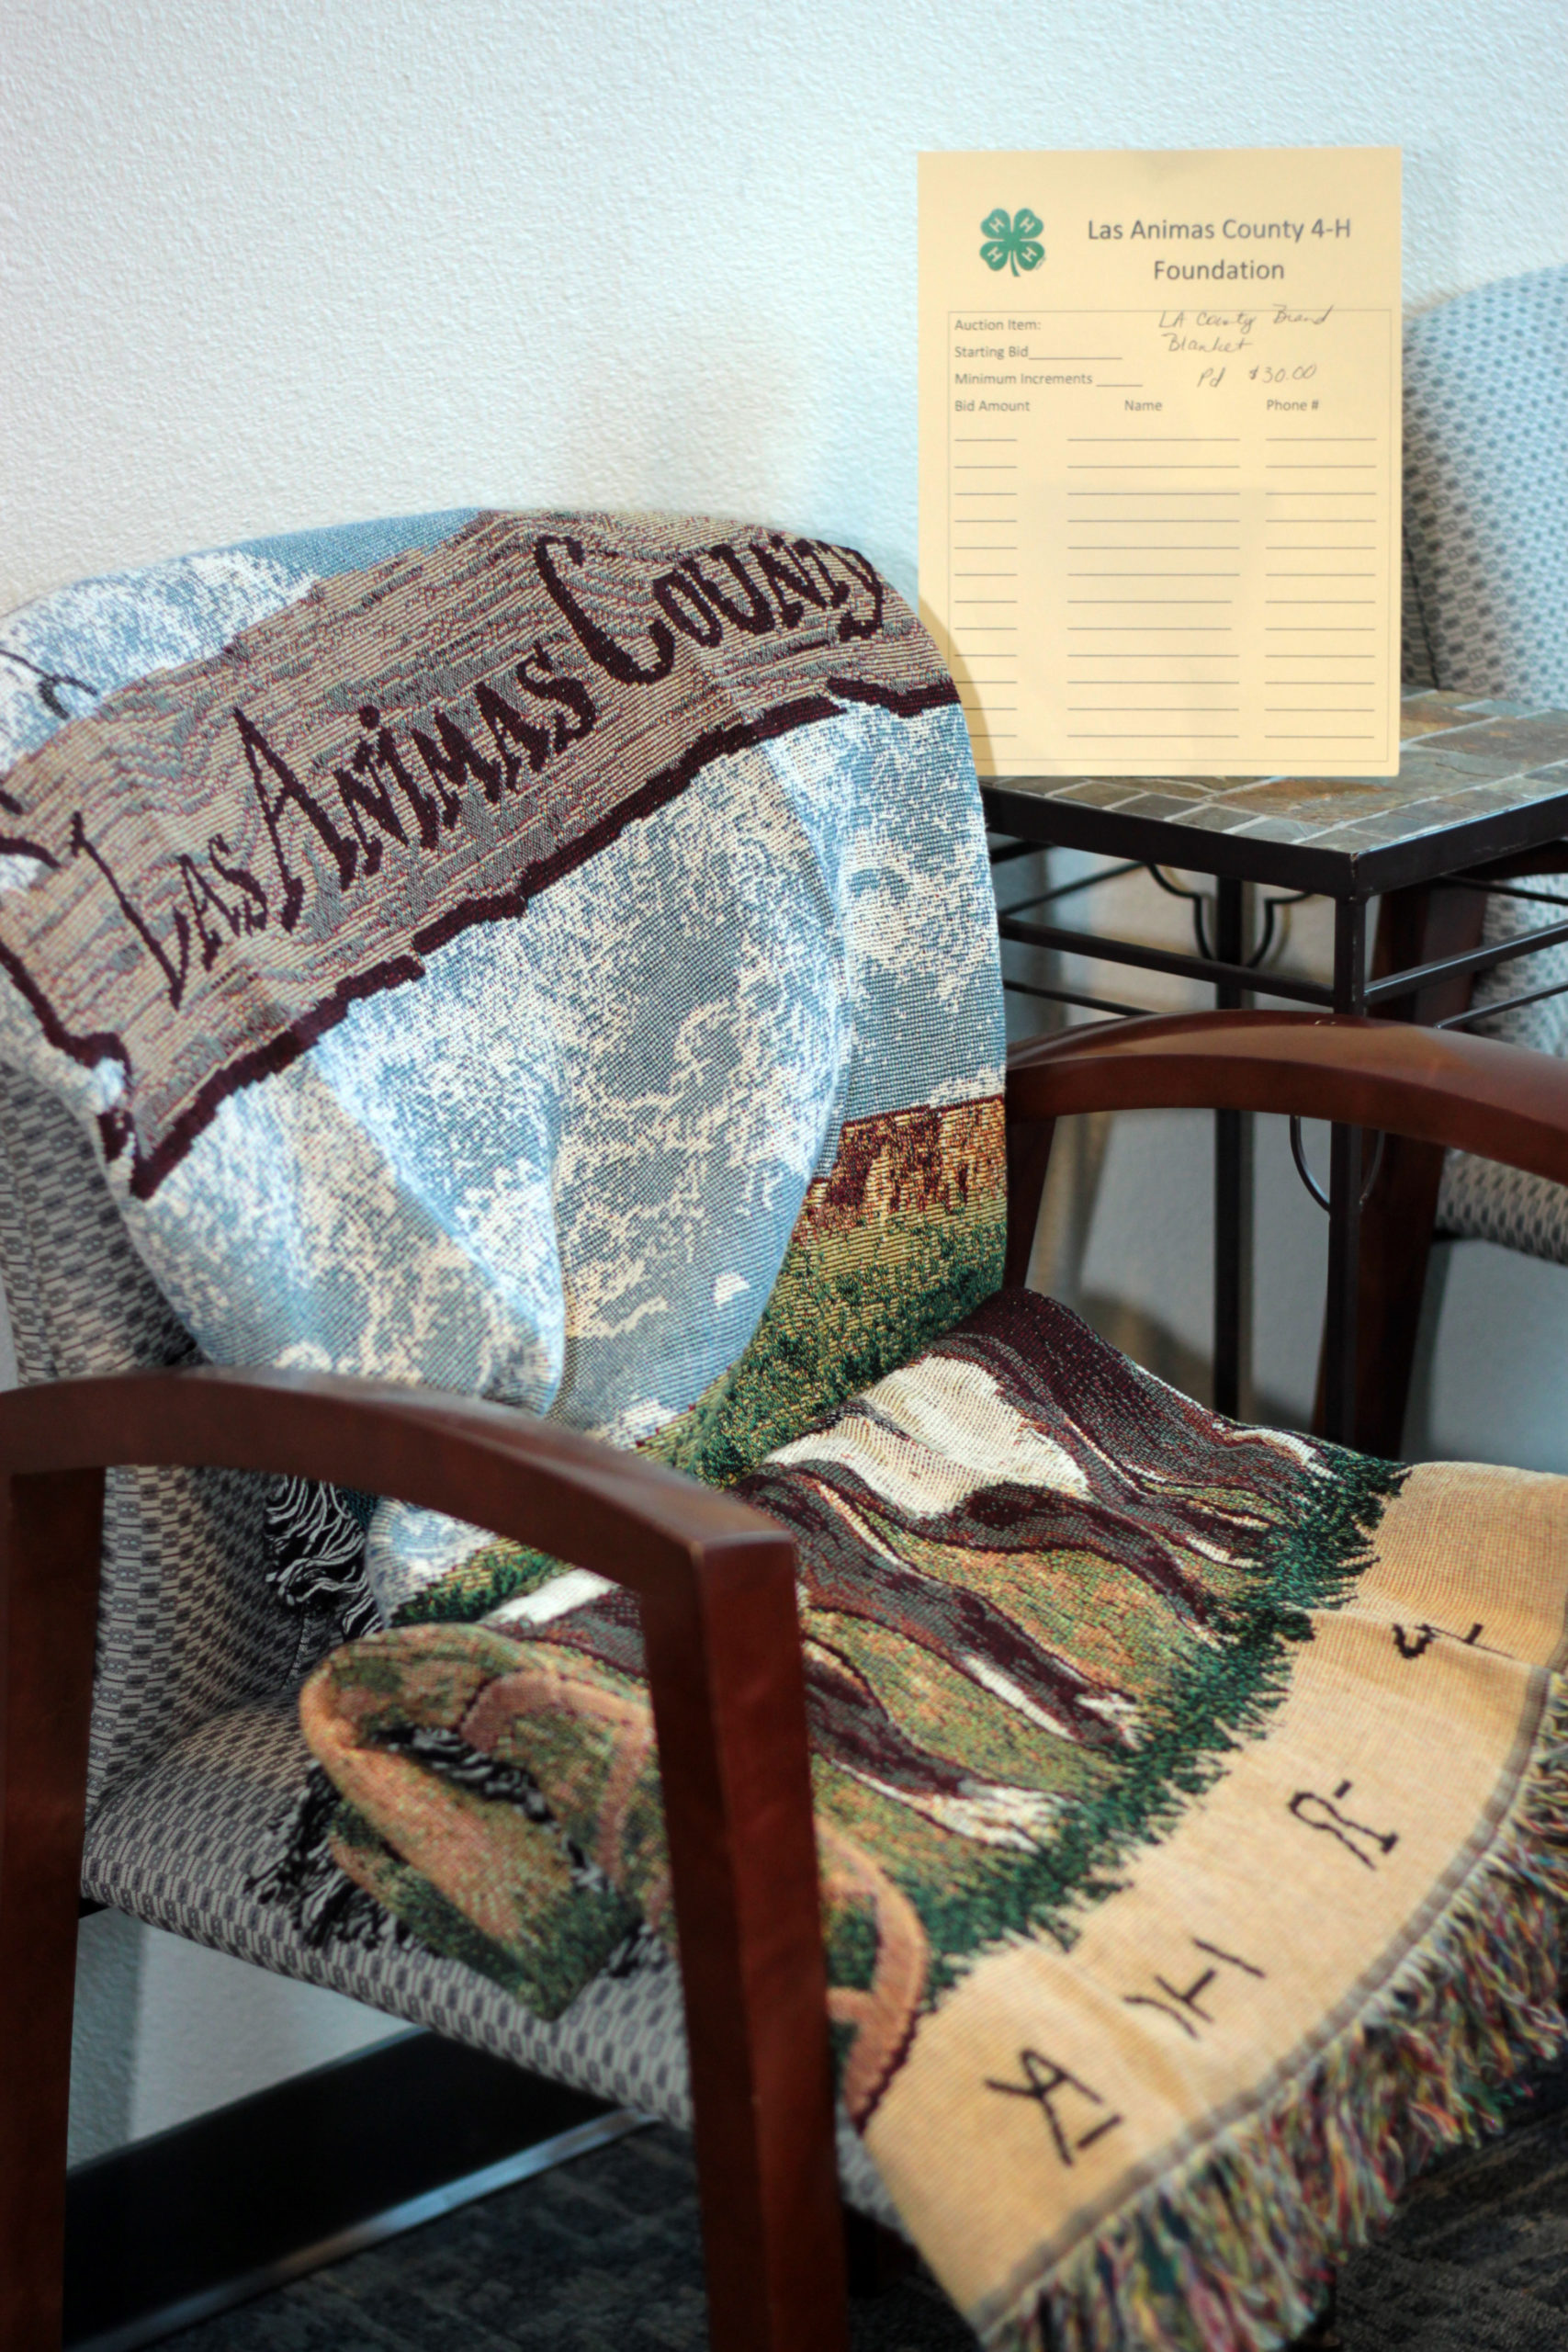 Las Animas County brand blanket - purchased from the Las Animas County Fair 4-H Foundation.